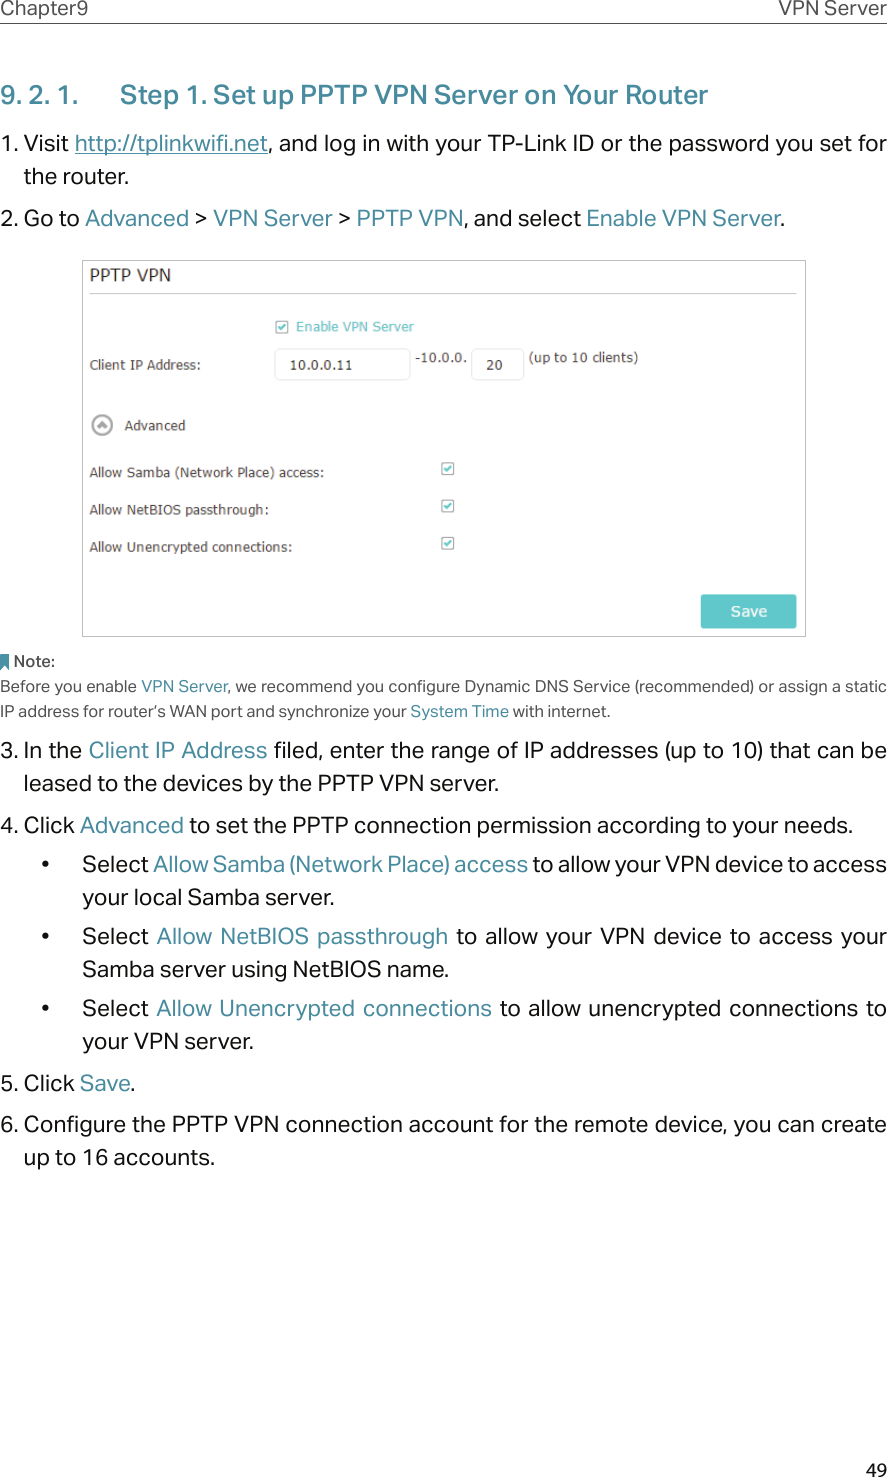 49Chapter9 VPN Server9. 2. 1.  Step 1. Set up PPTP VPN Server on Your Router1. Visit http://tplinkwifi.net, and log in with your TP-Link ID or the password you set for the router.2. Go to Advanced &gt; VPN Server &gt; PPTP VPN, and select Enable VPN Server.Note:Before you enable VPN Server, we recommend you configure Dynamic DNS Service (recommended) or assign a static IP address for router’s WAN port and synchronize your System Time with internet.3. In the Client IP Address filed, enter the range of IP addresses (up to 10) that can be leased to the devices by the PPTP VPN server.4. Click Advanced to set the PPTP connection permission according to your needs.•  Select Allow Samba (Network Place) access to allow your VPN device to access your local Samba server.•  Select  Allow NetBIOS  passthrough  to allow your  VPN  device to  access your Samba server using NetBIOS name.•  Select Allow Unencrypted connections to allow unencrypted connections to your VPN server.5. Click Save.6. Configure the PPTP VPN connection account for the remote device, you can create up to 16 accounts.